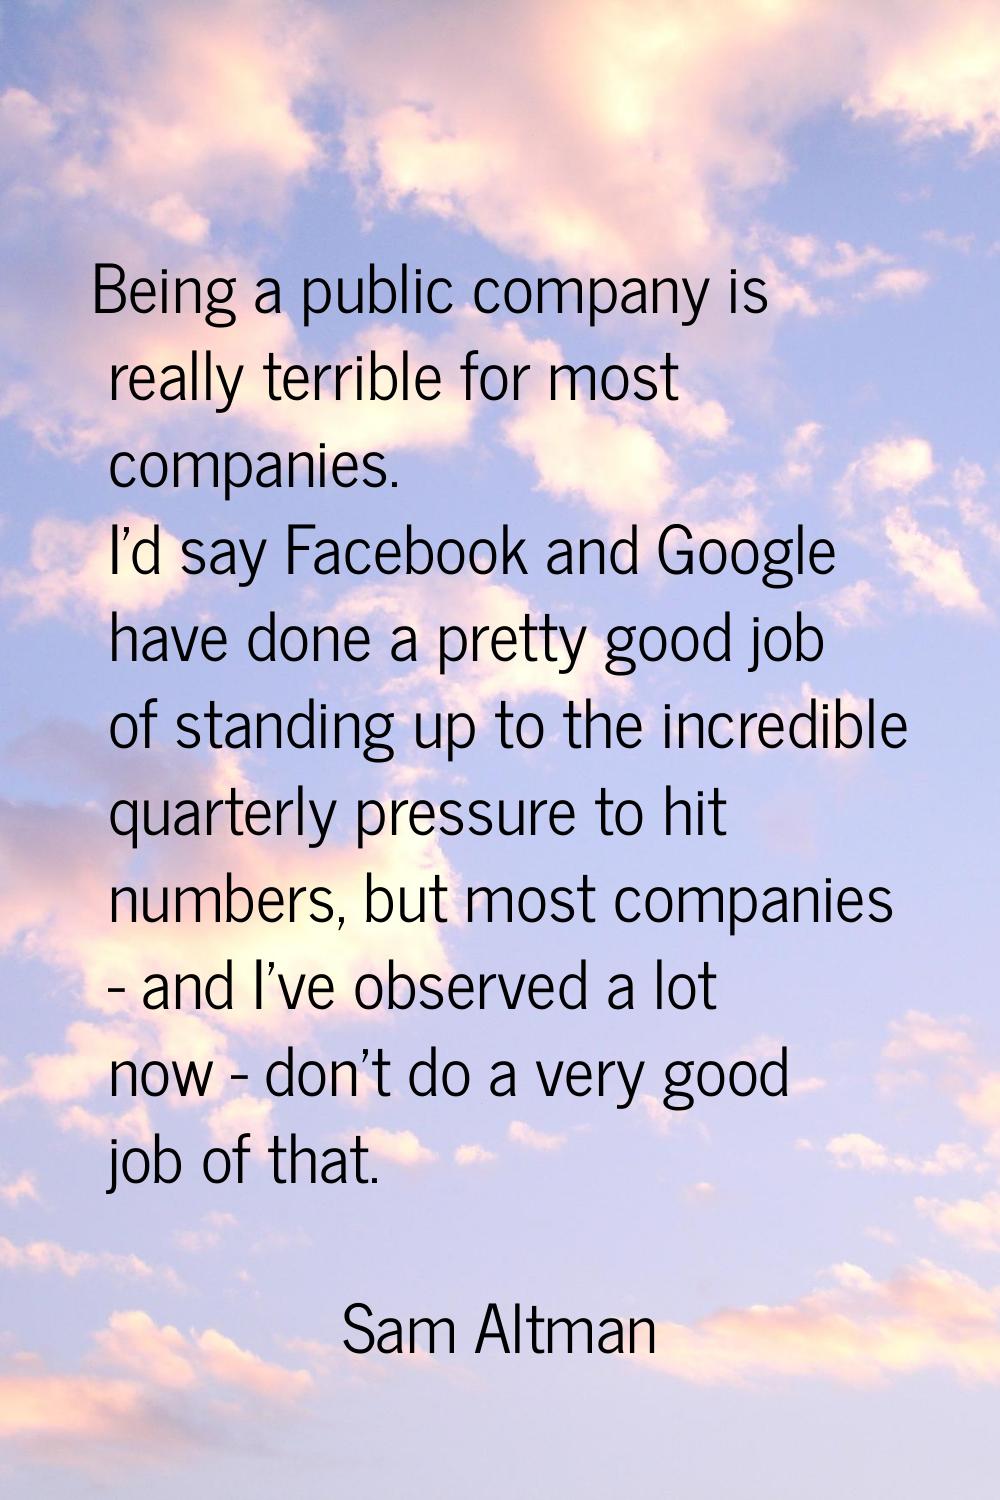 Being a public company is really terrible for most companies. I'd say Facebook and Google have done